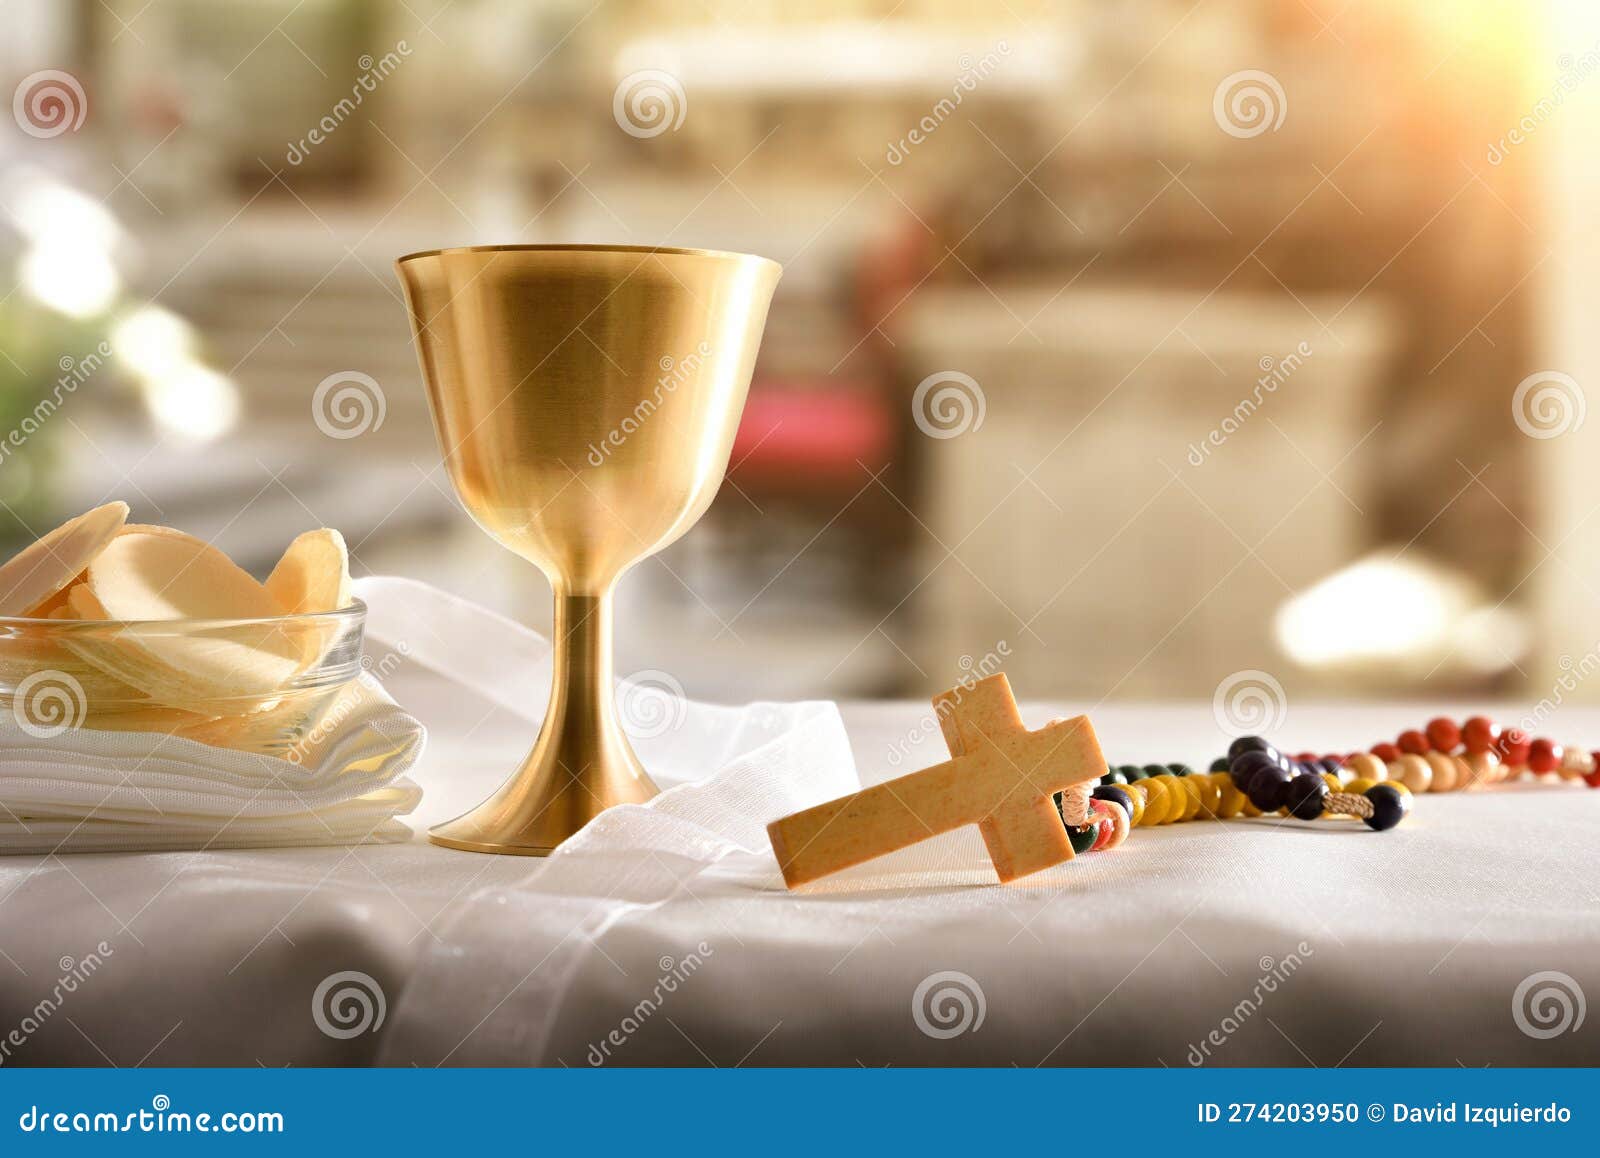 chalice and consecrated host on table at the altar